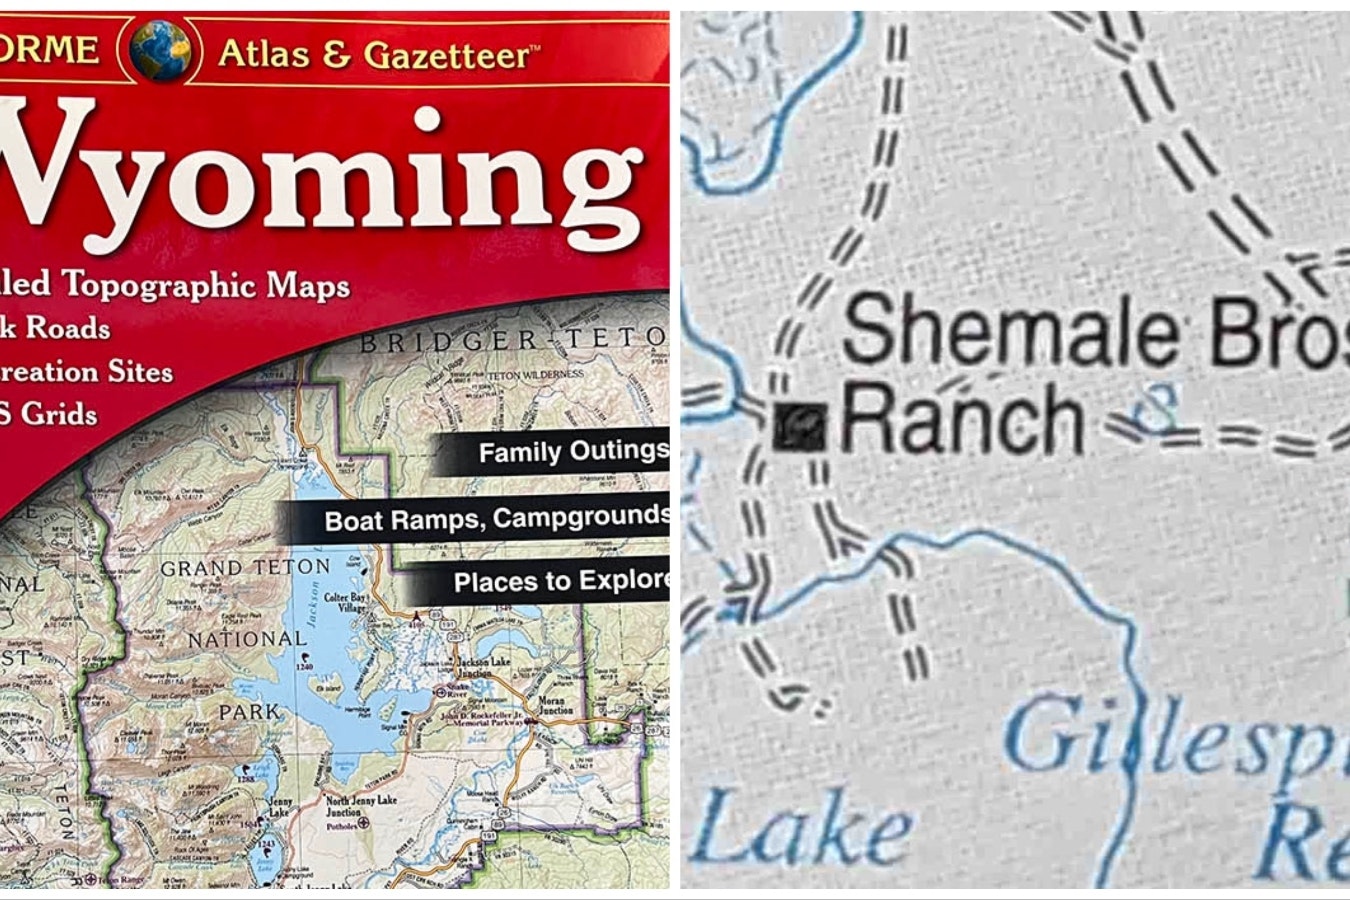 Cover and shemale ranch 11 9 23